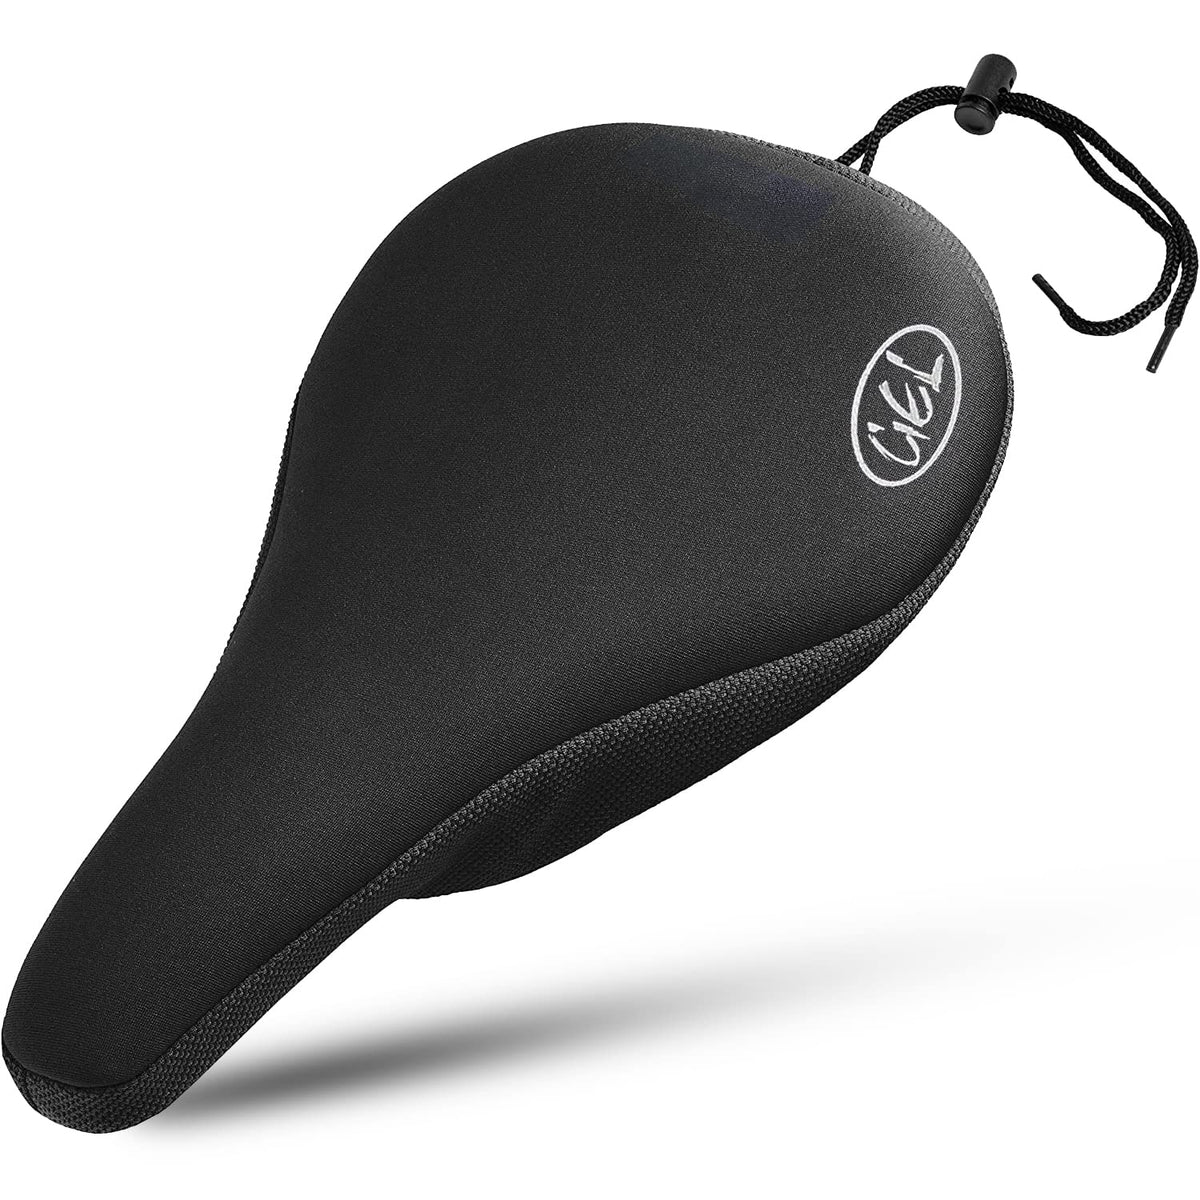 Strauss Premium with 100% Silicone Gel Saddle Bicycle Seat Cover, (Black)